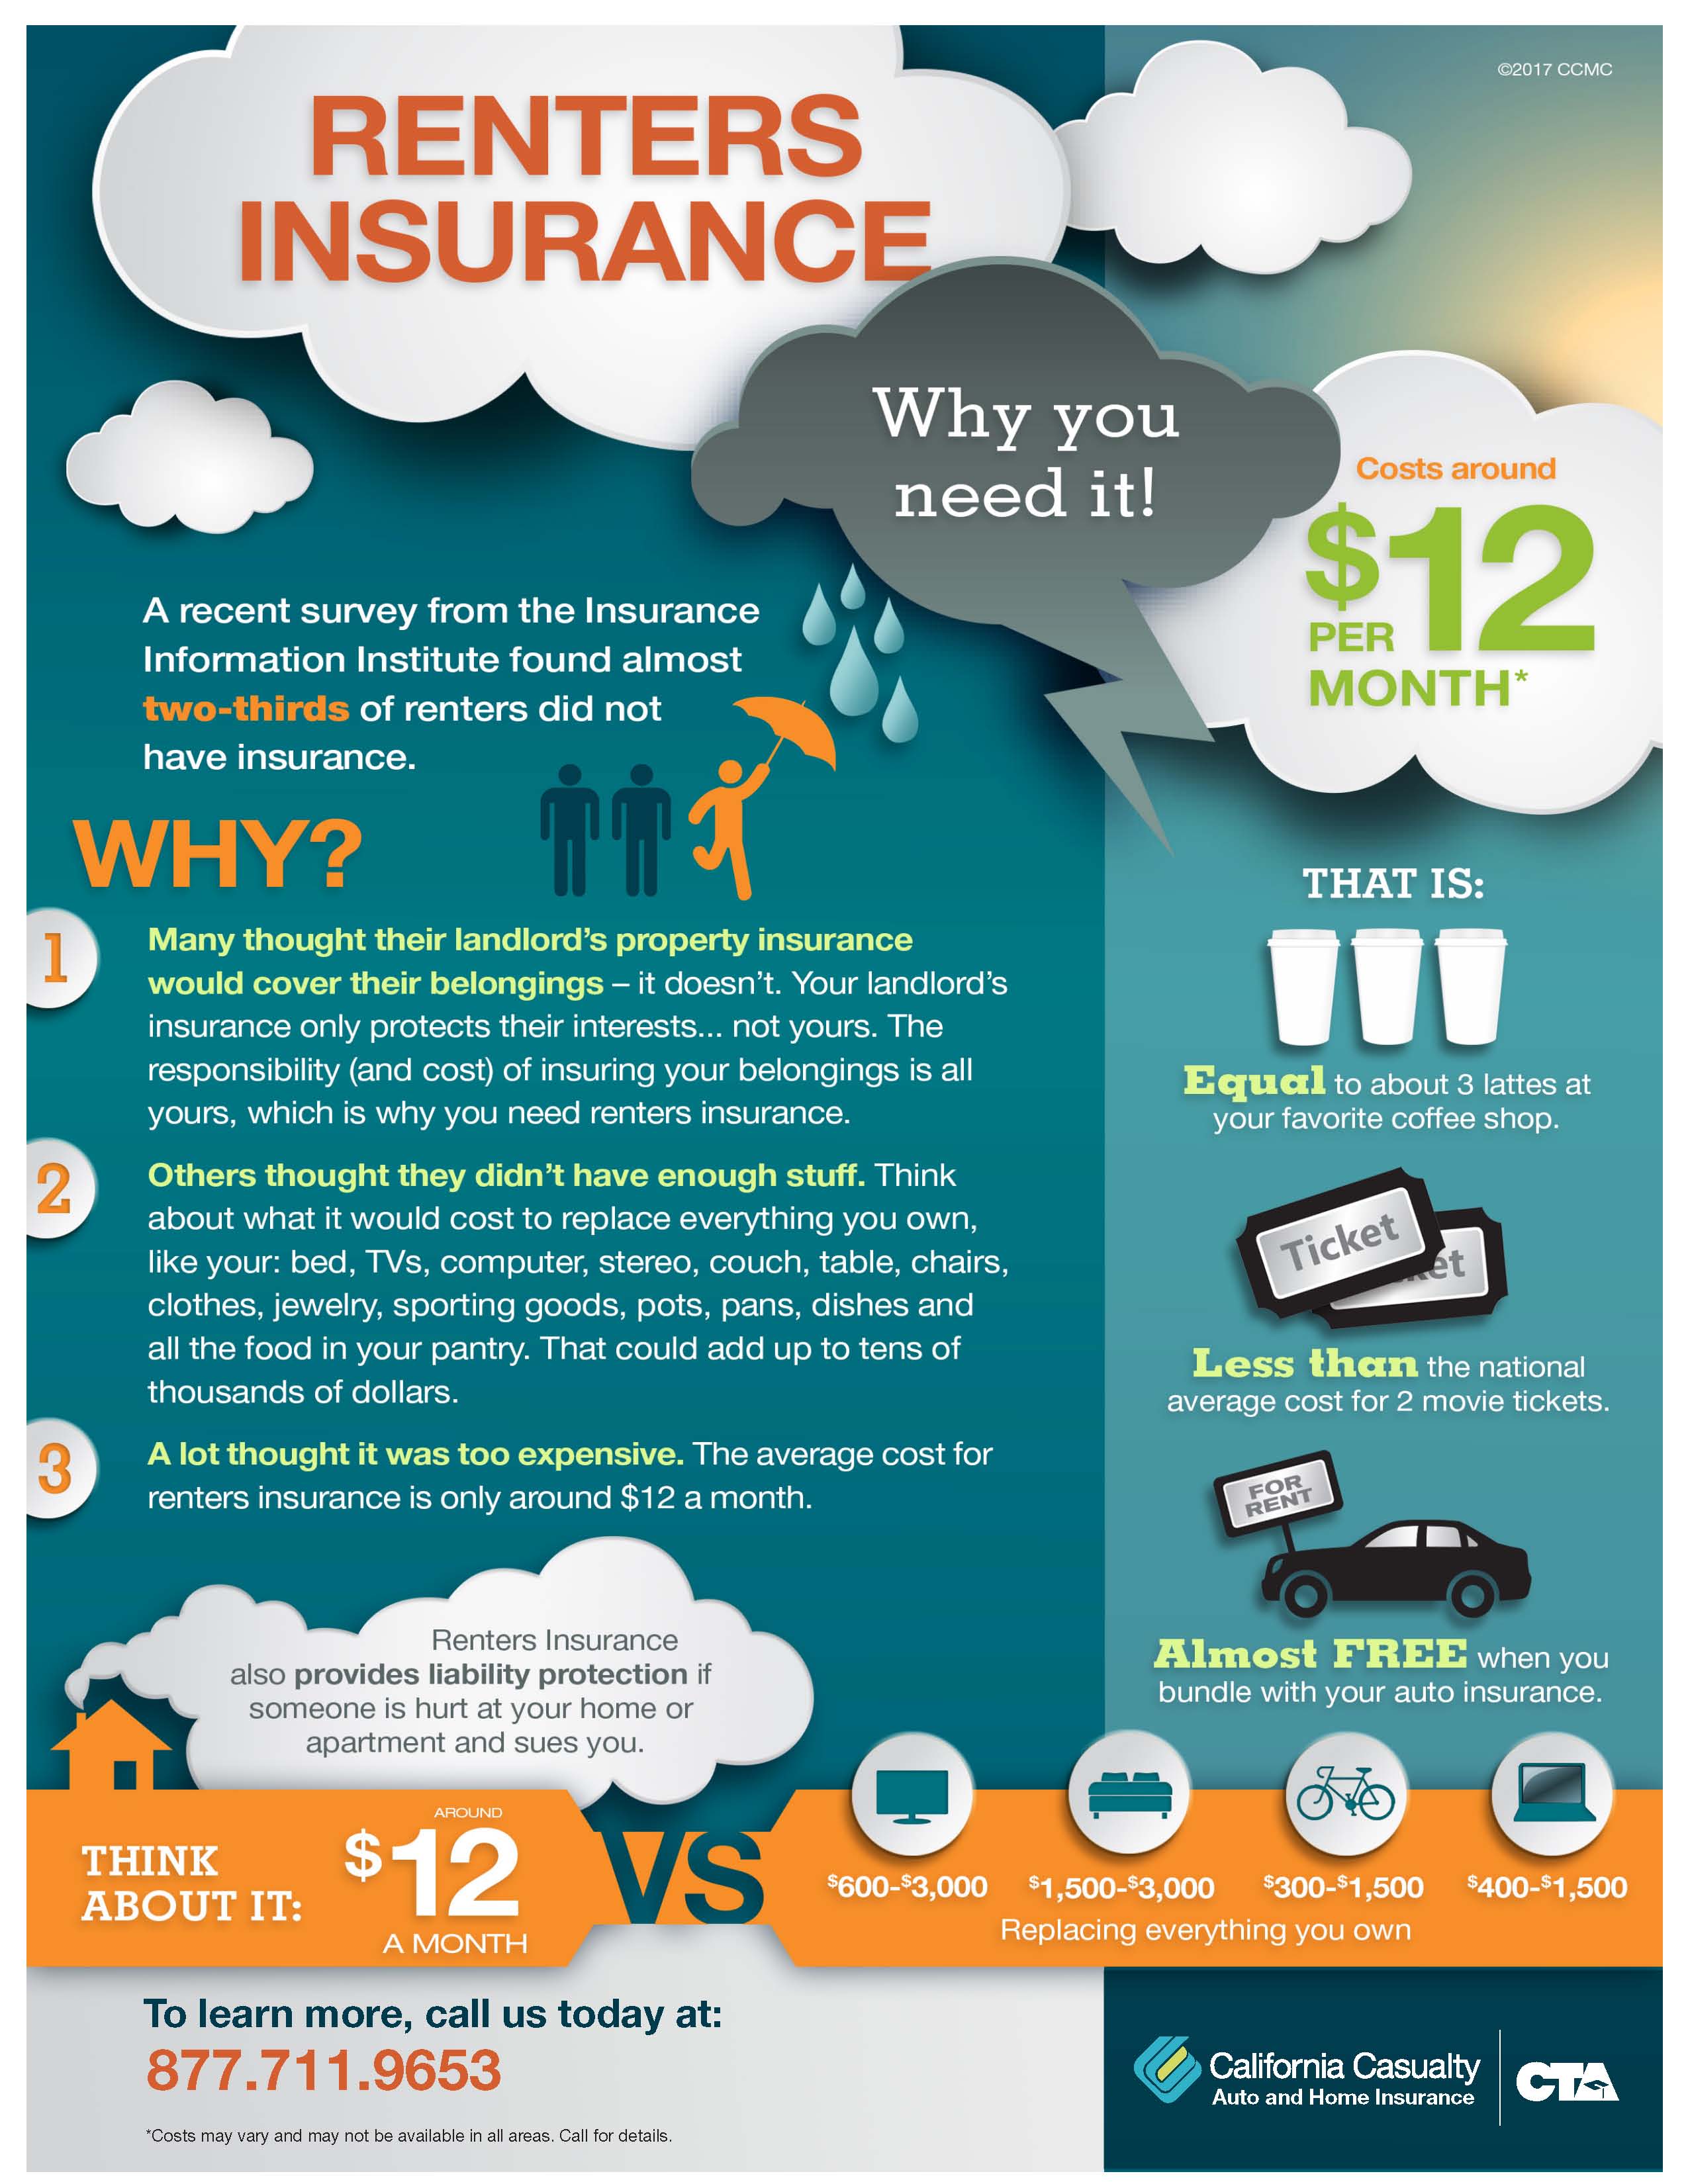 If you rent, you need renters insurance! Vacaville